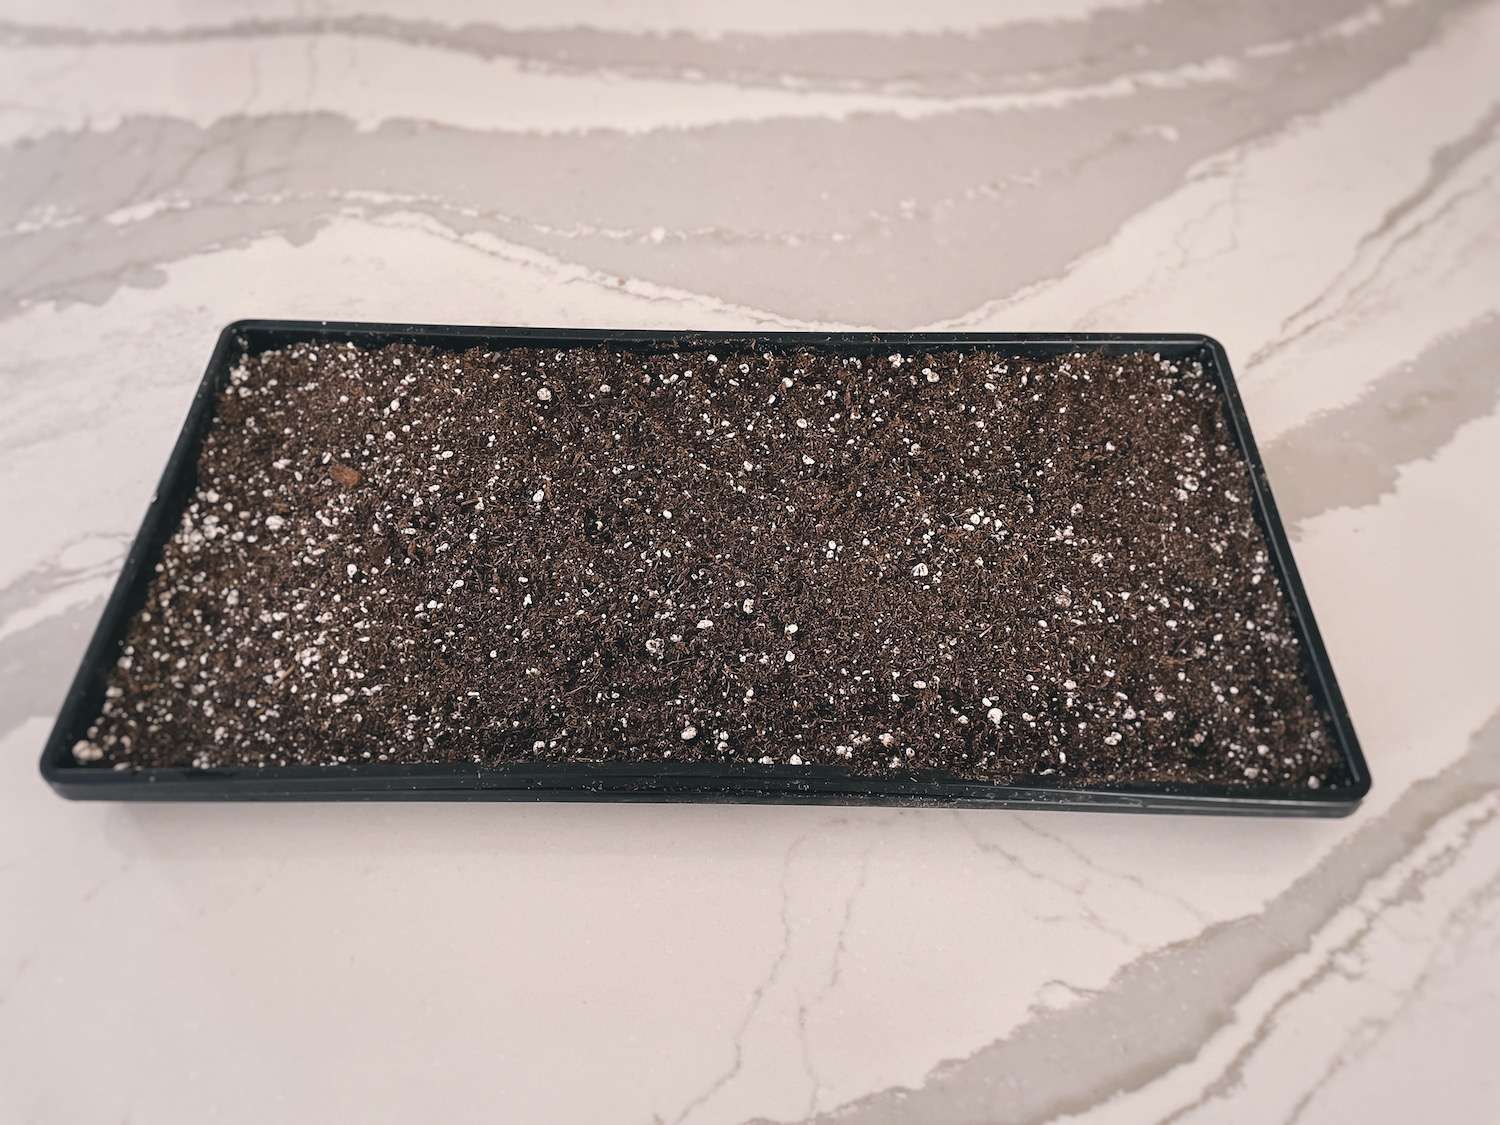 Soil packed into a 1020 growing tray for microgreens